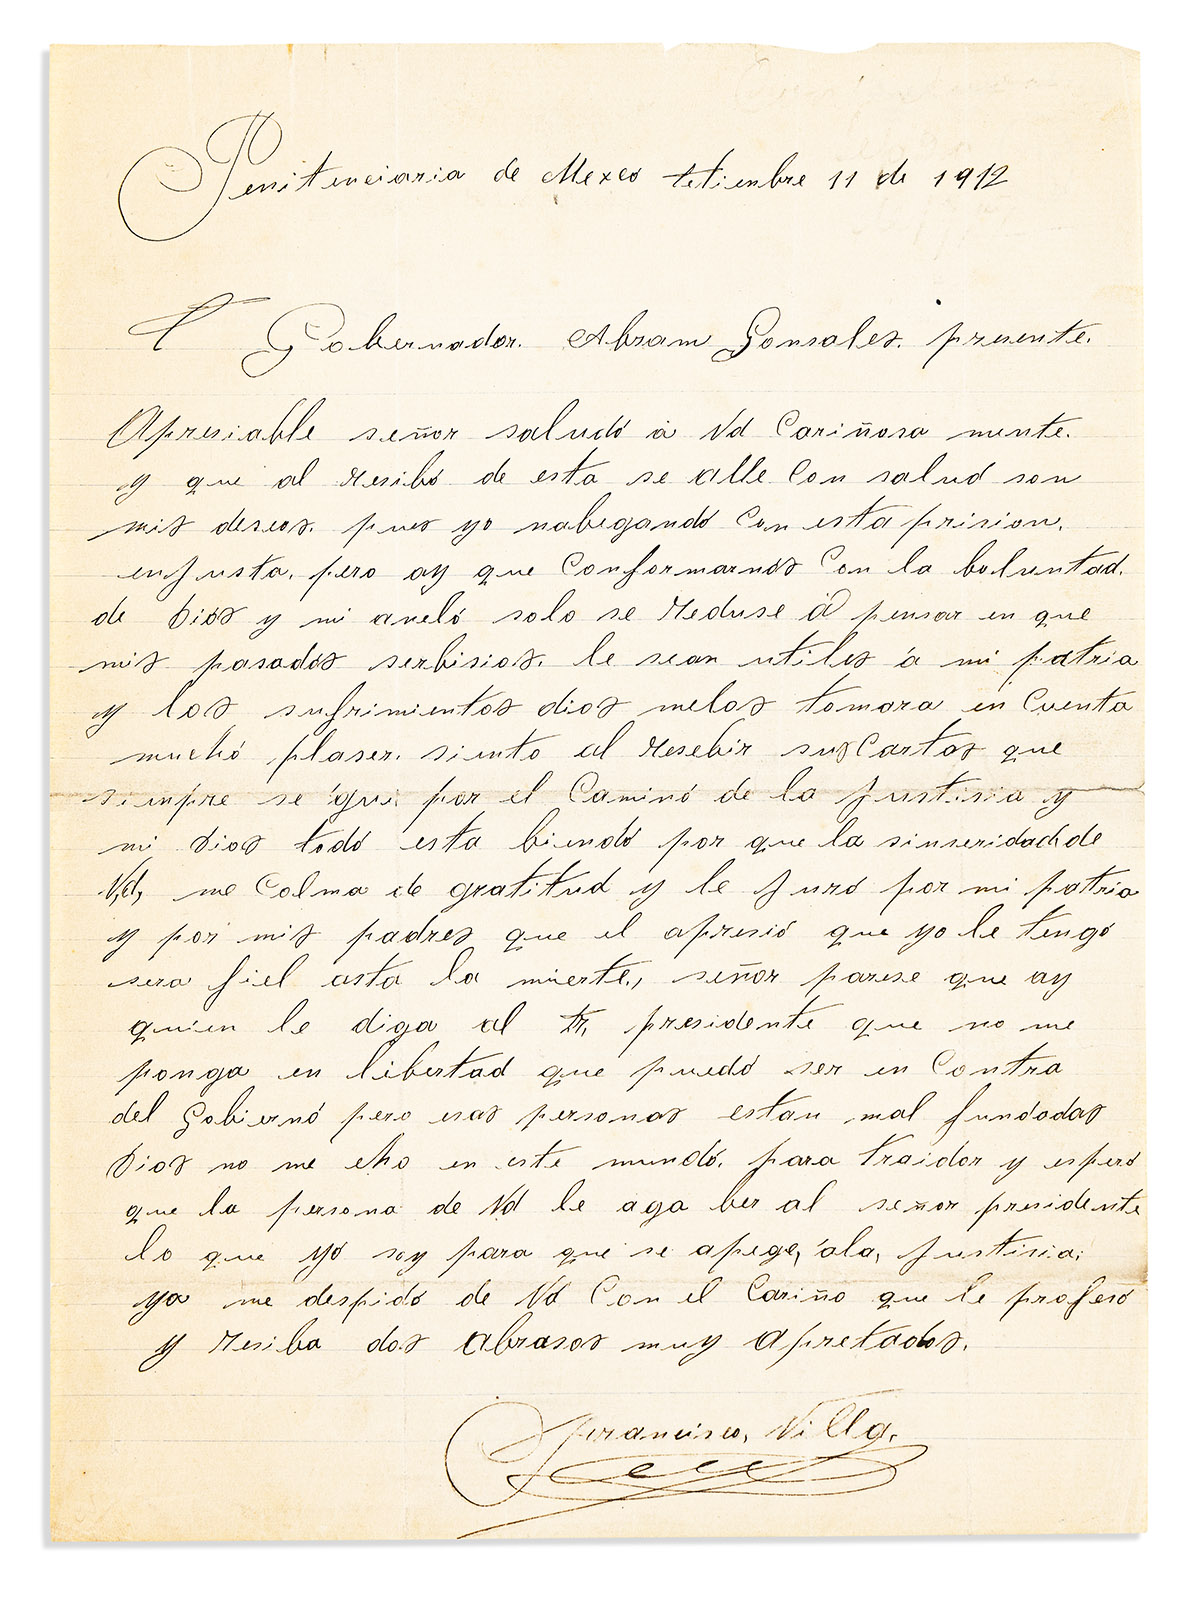 VILLA, FRANCISCO (PANCHO). Autograph Letter Signed, to Chihuahua Governor Abraham González (Abram Gonsales), in Spanish,